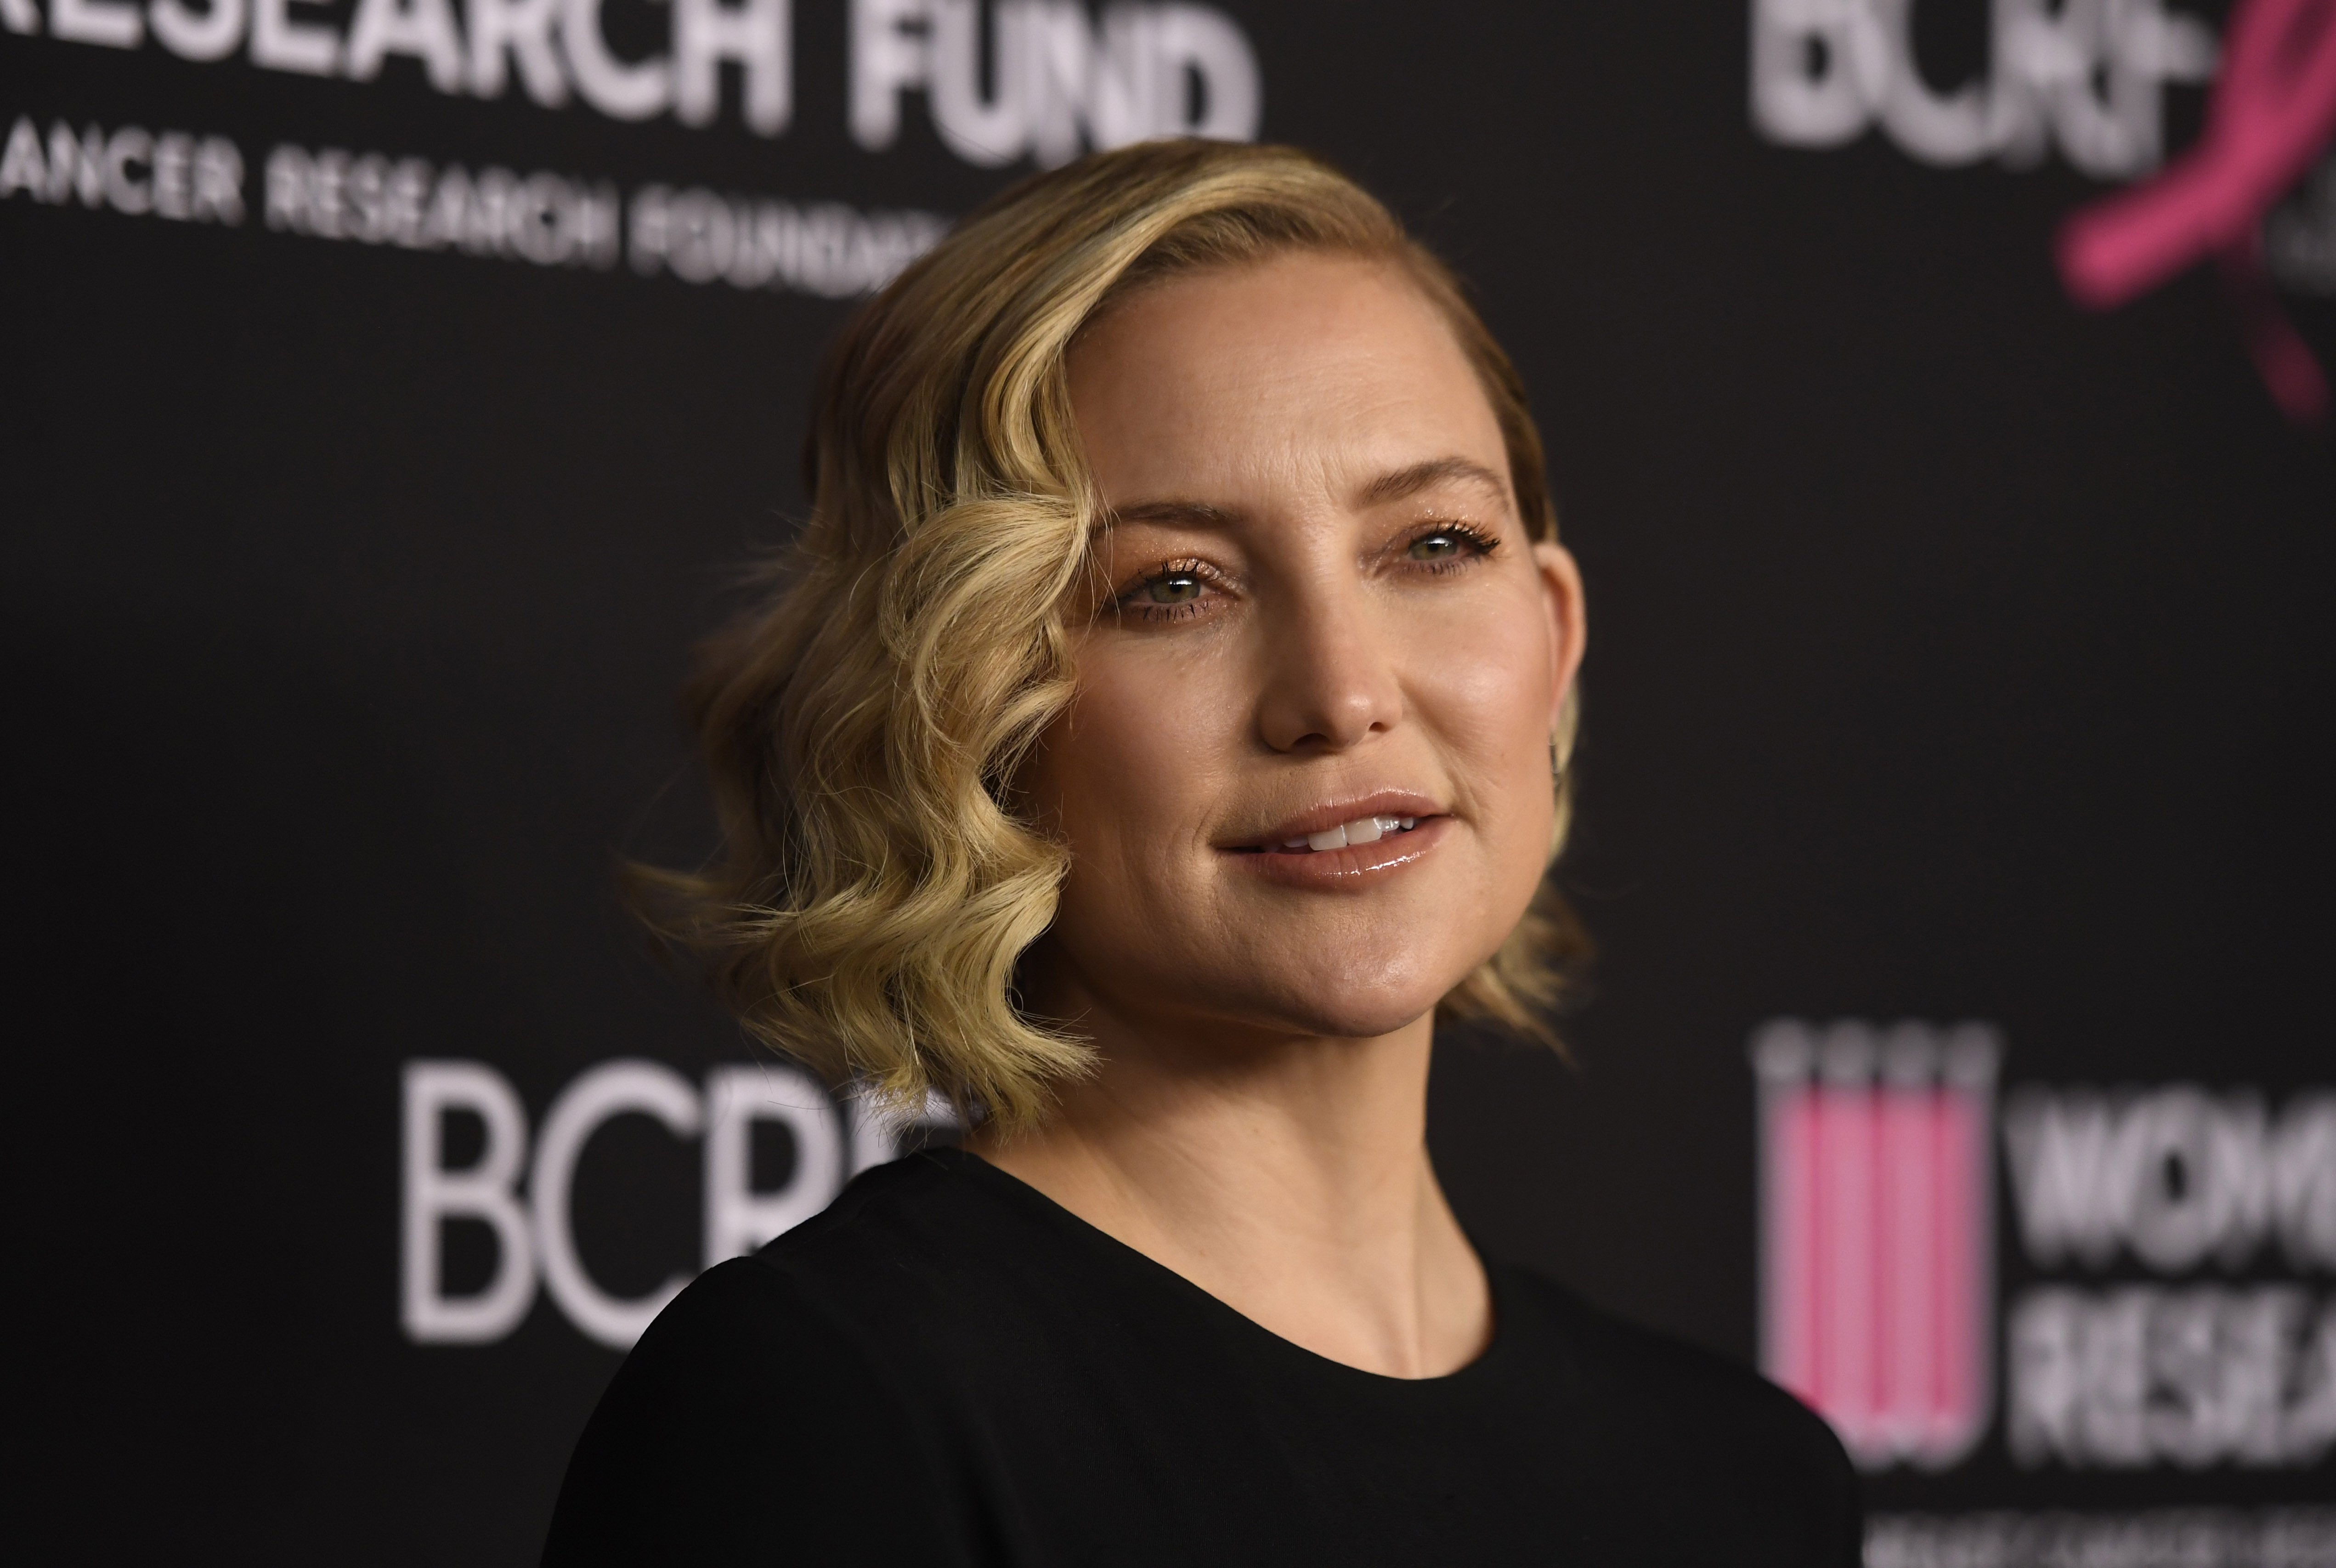 February 2020 Kate Hudson attended an event for The Women's Cancer Research Fund.| Photo Getty Images